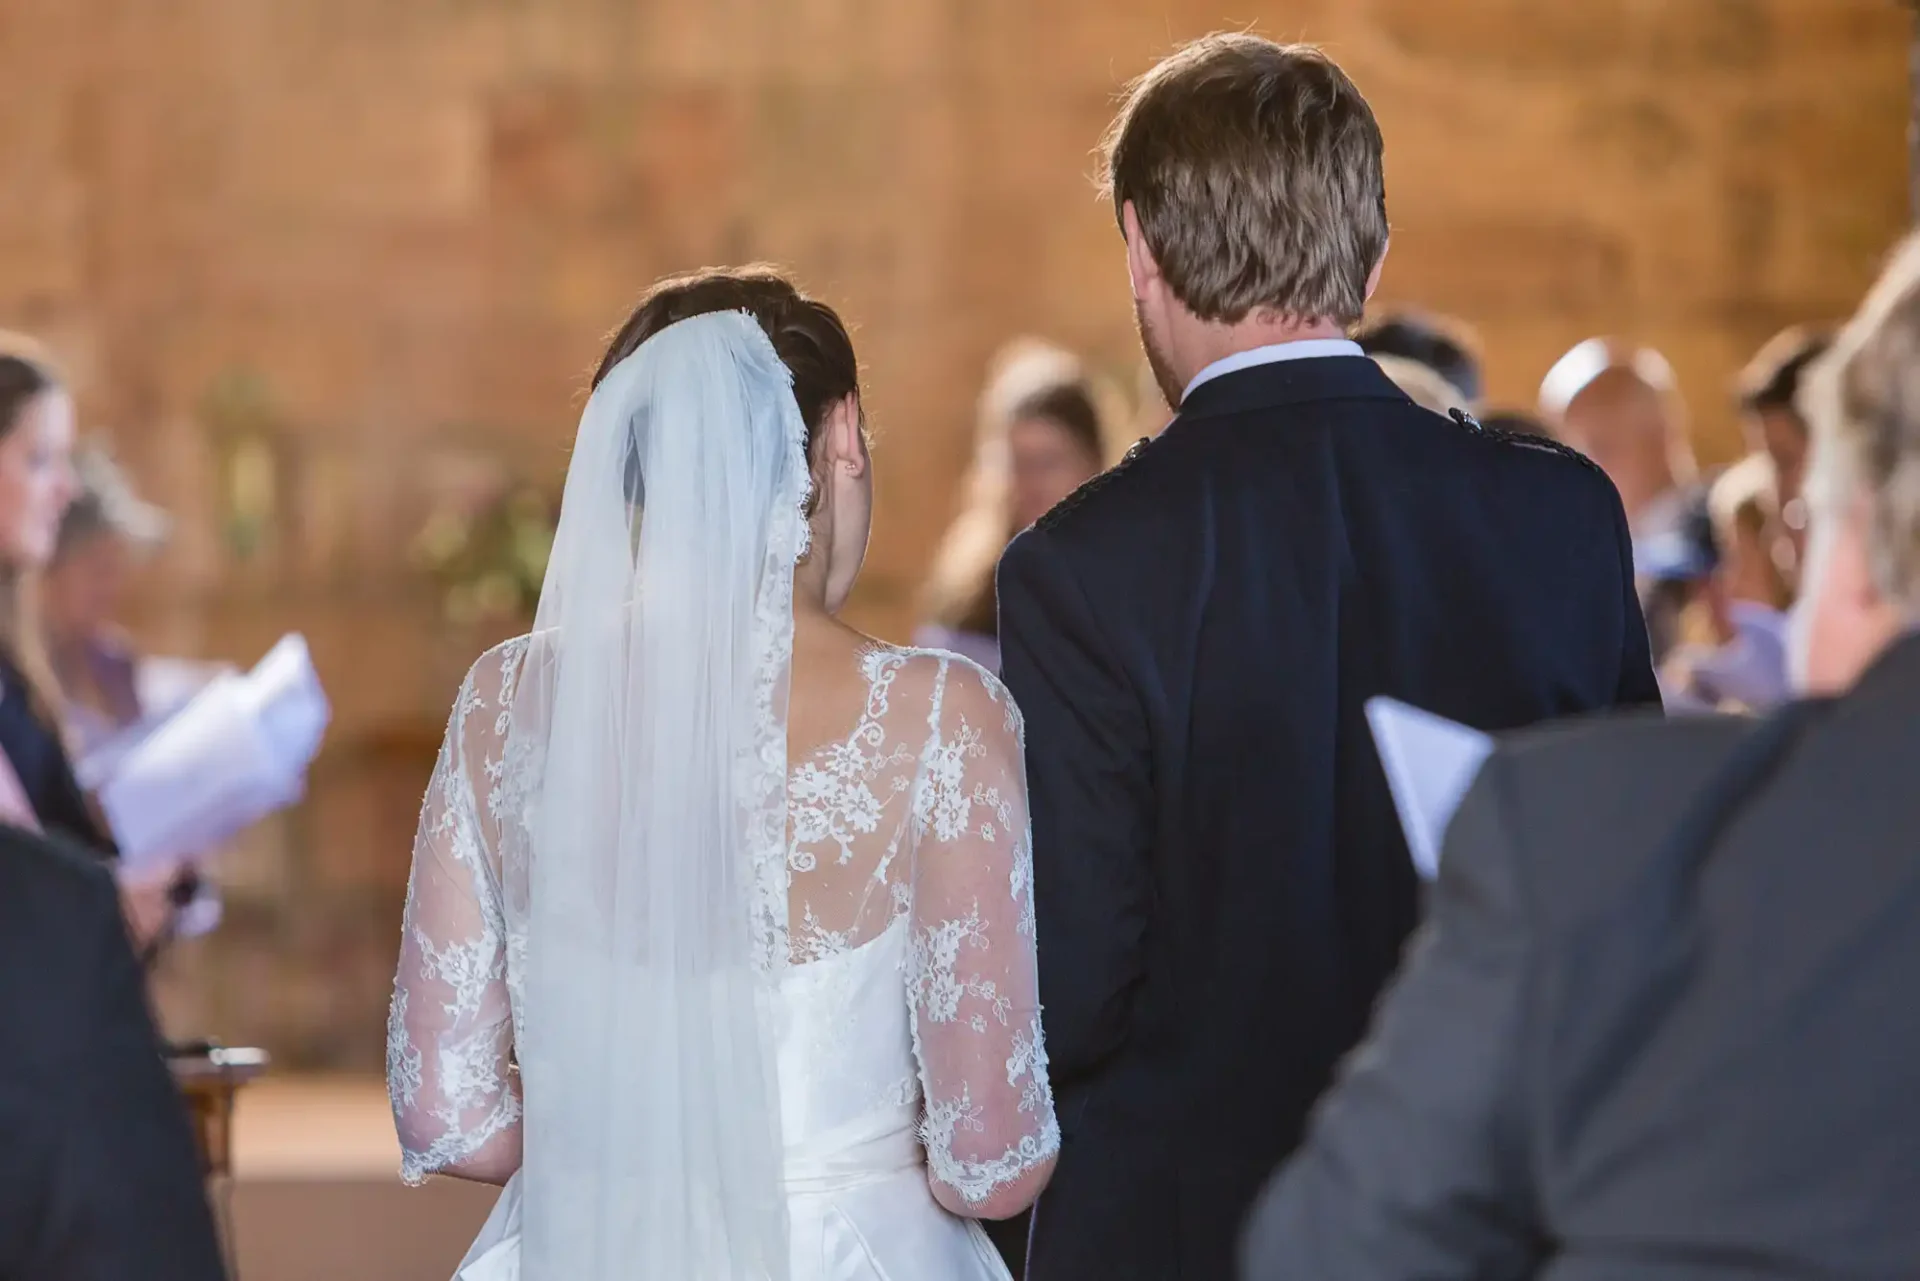 Back view of a bride in a lace gown and a groom in a suit, standing together during their wedding ceremony inside a church.